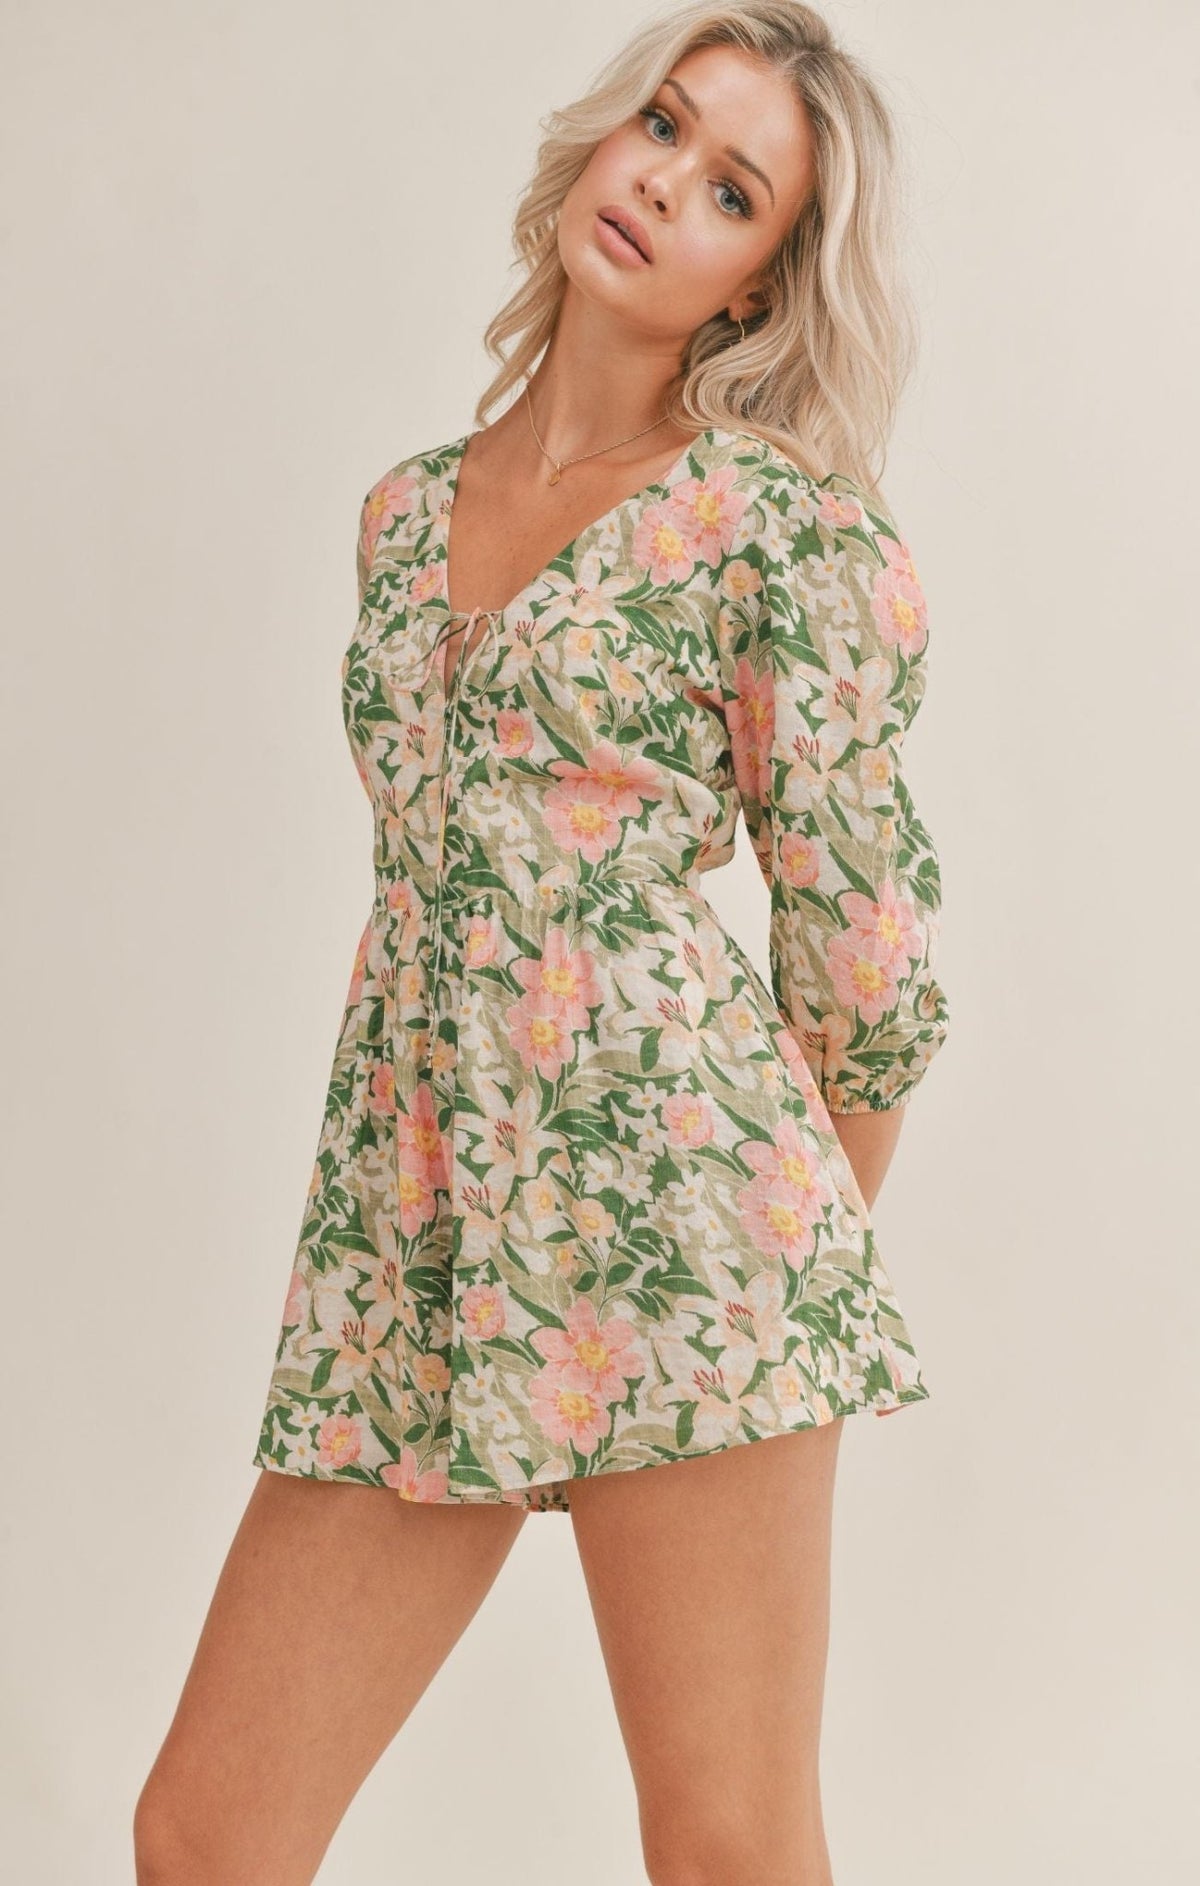 Sage the Label Romper for Sale - Romper - Blooming Daily